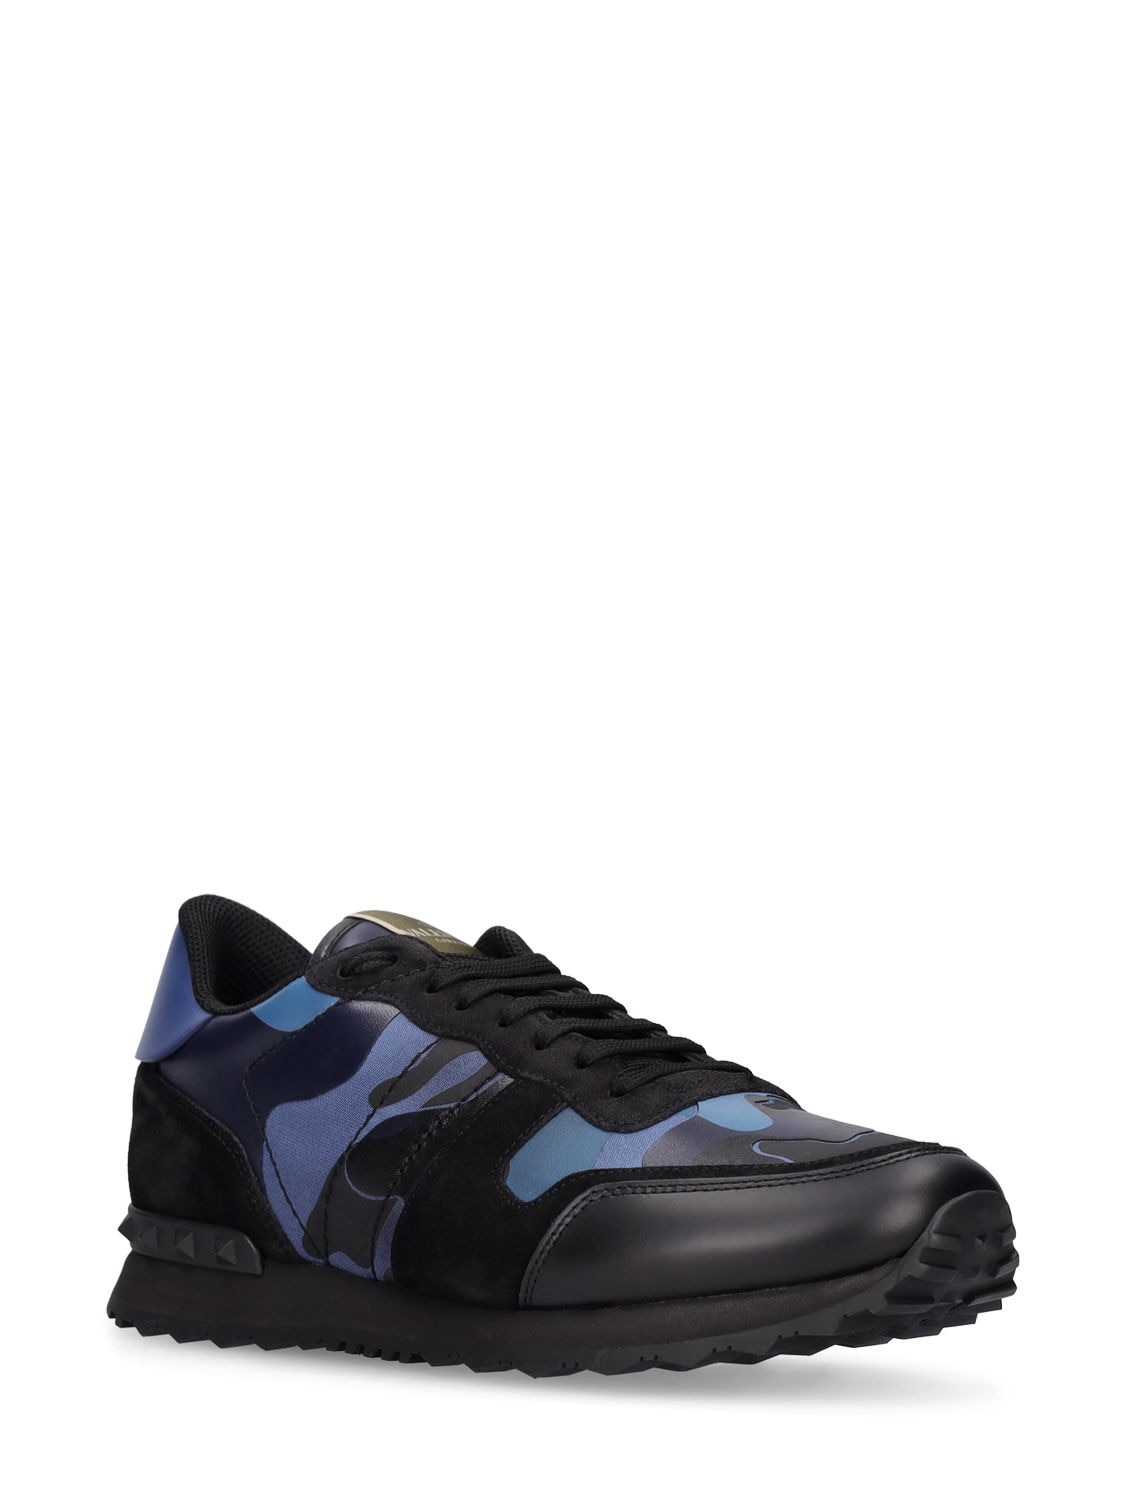 Shop Valentino Rock Runner Leather Sneakers In Blue,black